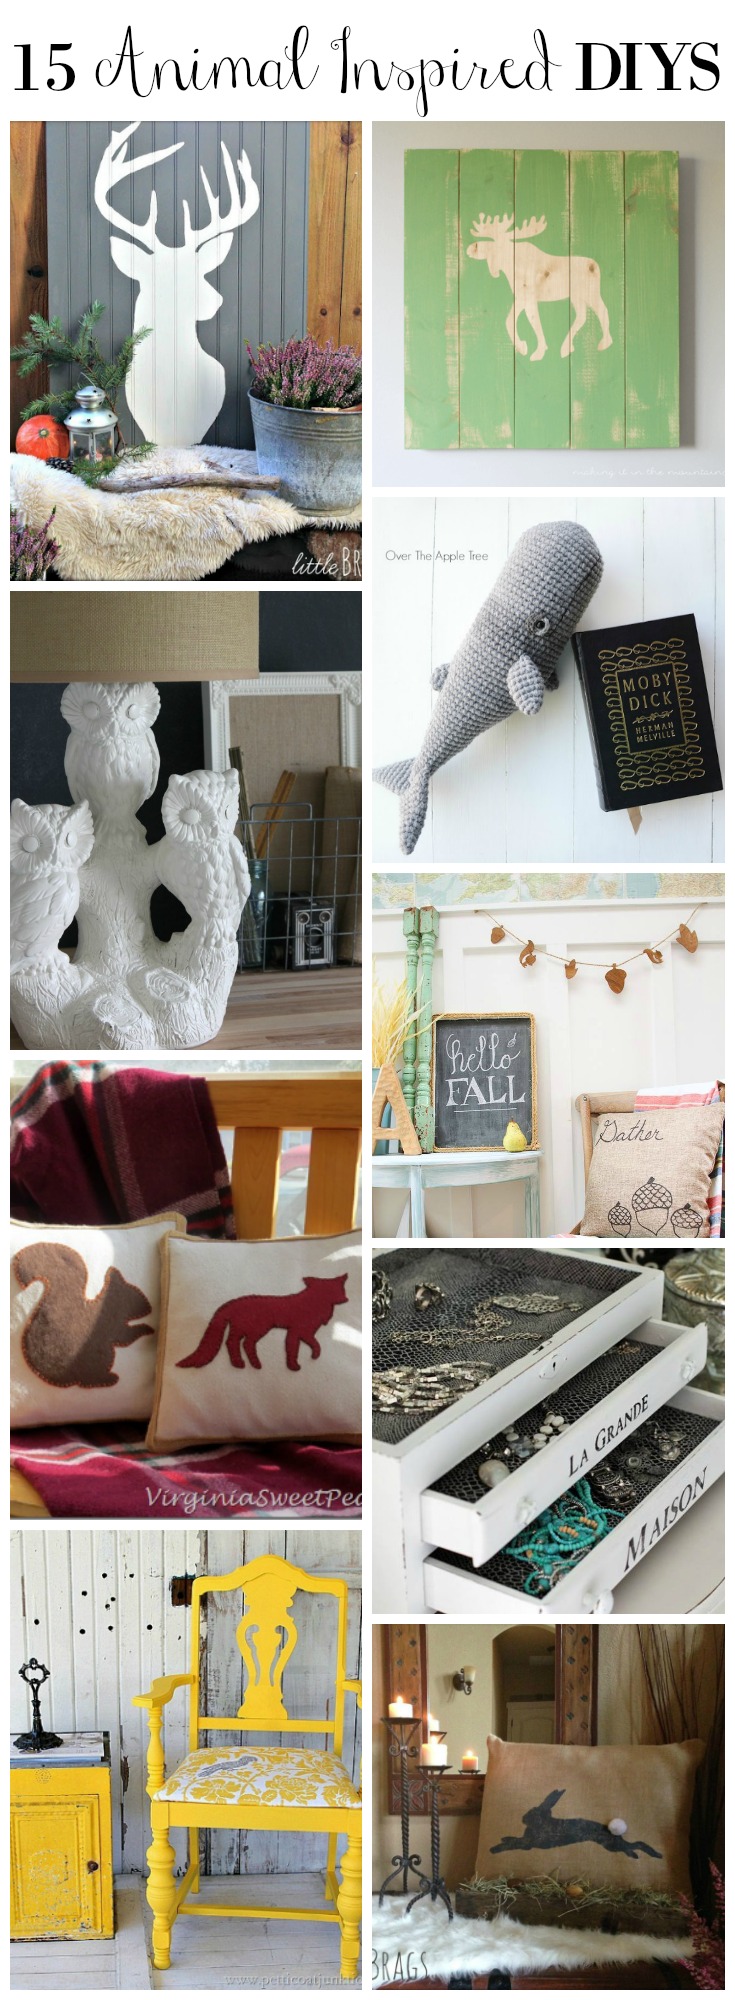 15-animal-inspired-diy-projects-featured-at-the-happy-housie